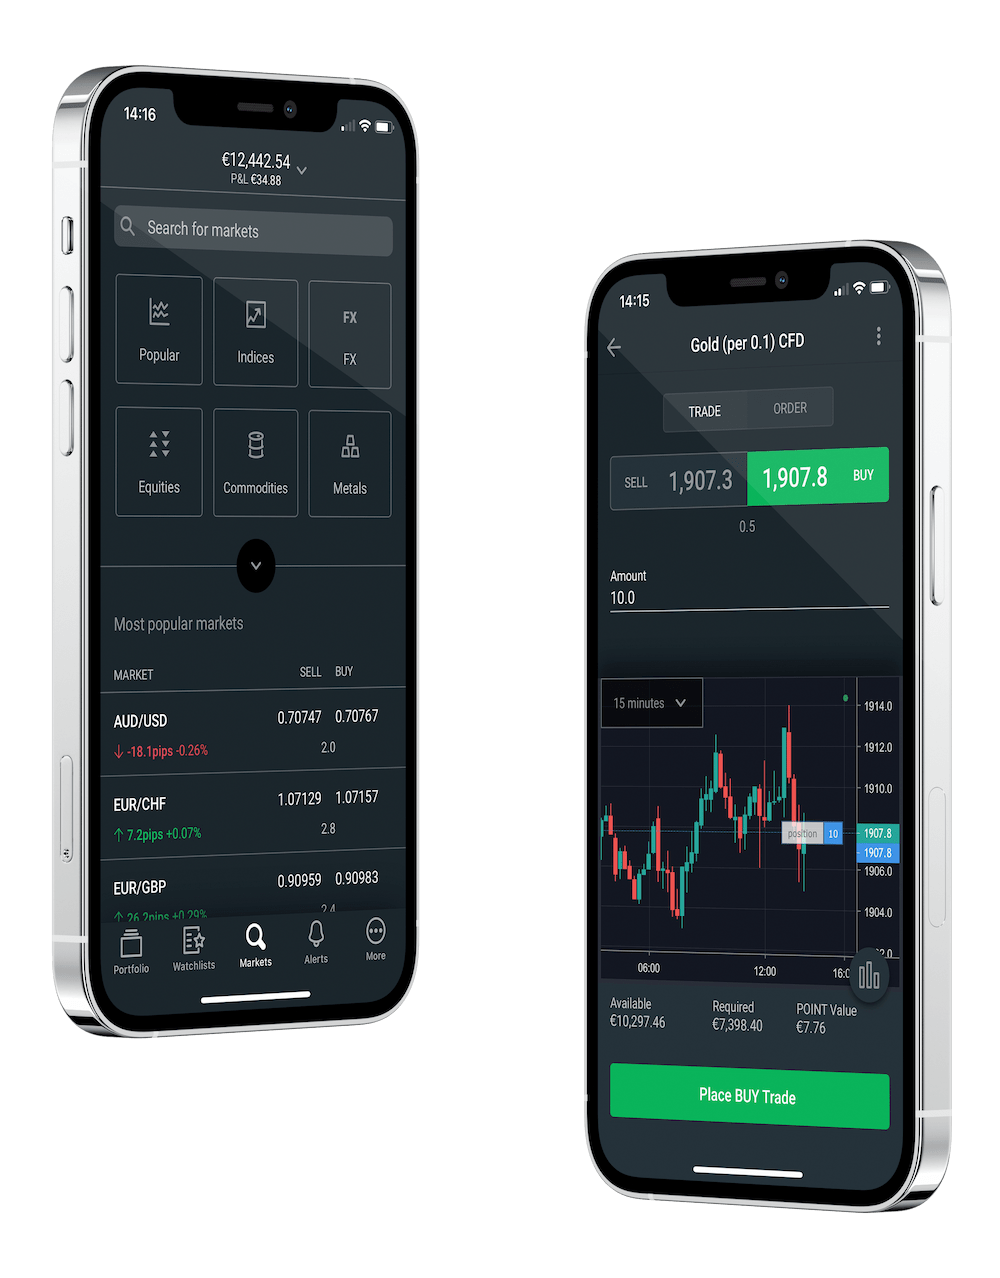 2 mobile phones showing trading app and CFD screens